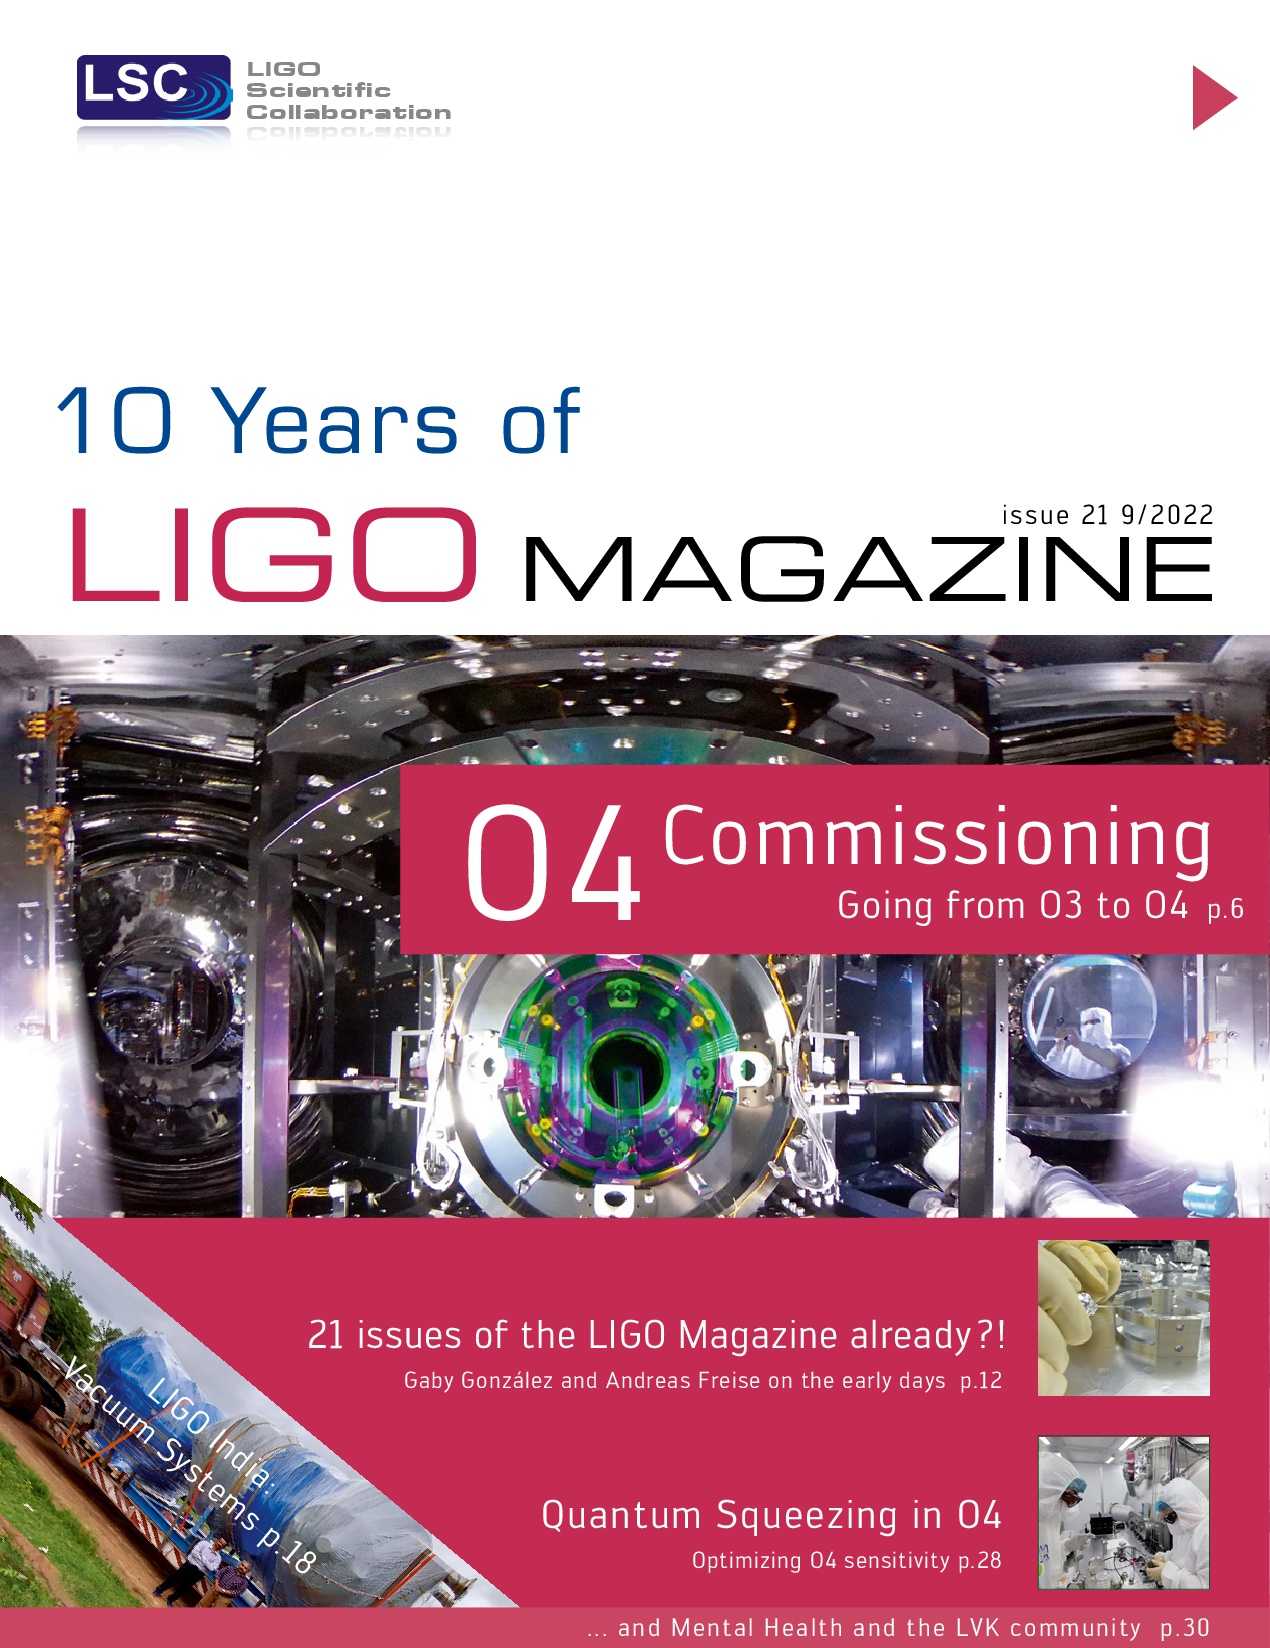 News-Image 8 of: New LIGO Magazine Issue 21 is out